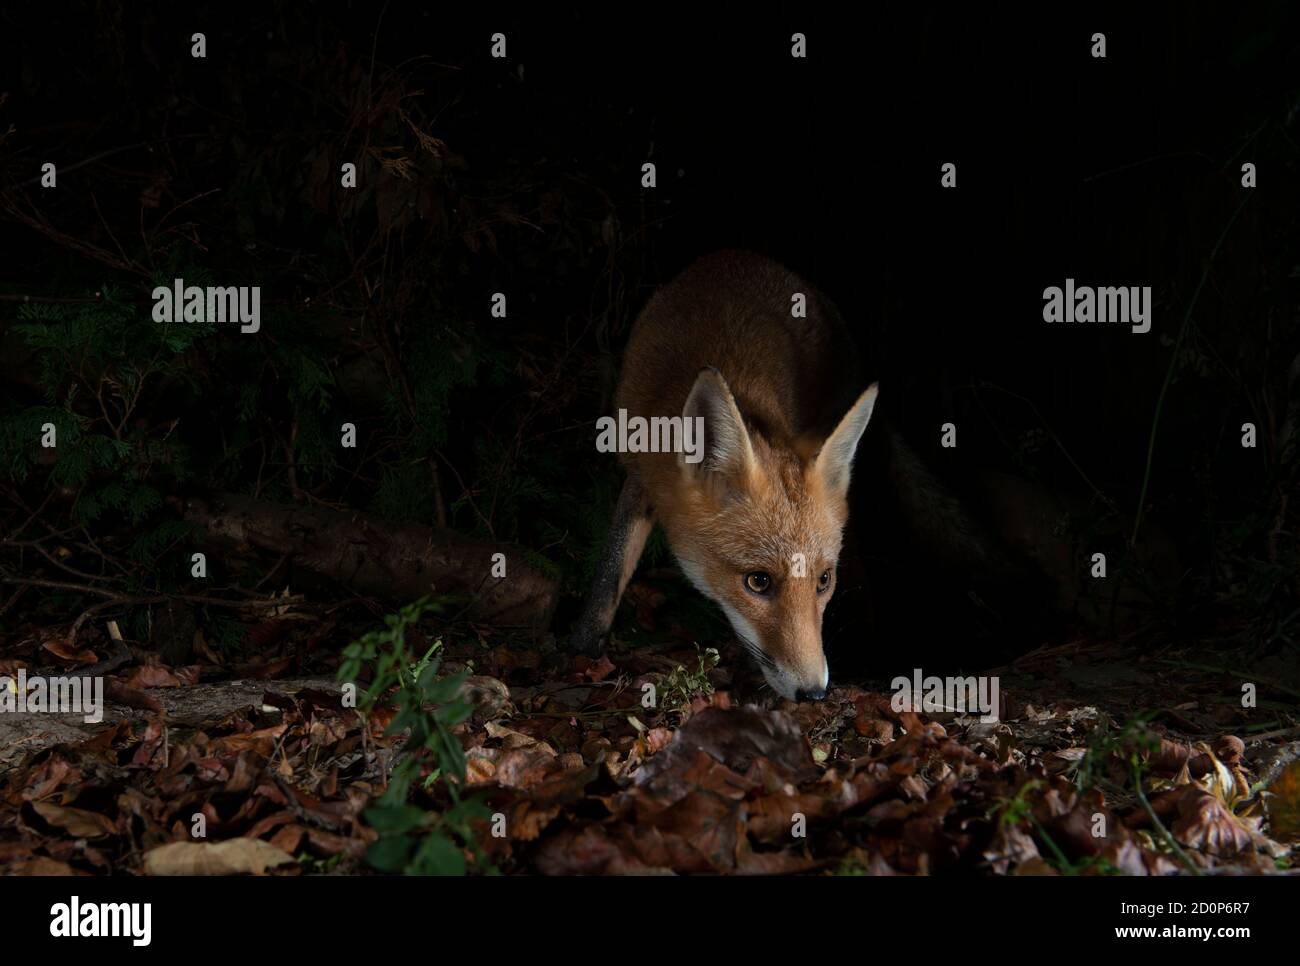 Fox at night sniffing the ground, nose down on dead leaves coming out of the darkness, head in light body in shadows black background Stock Photo